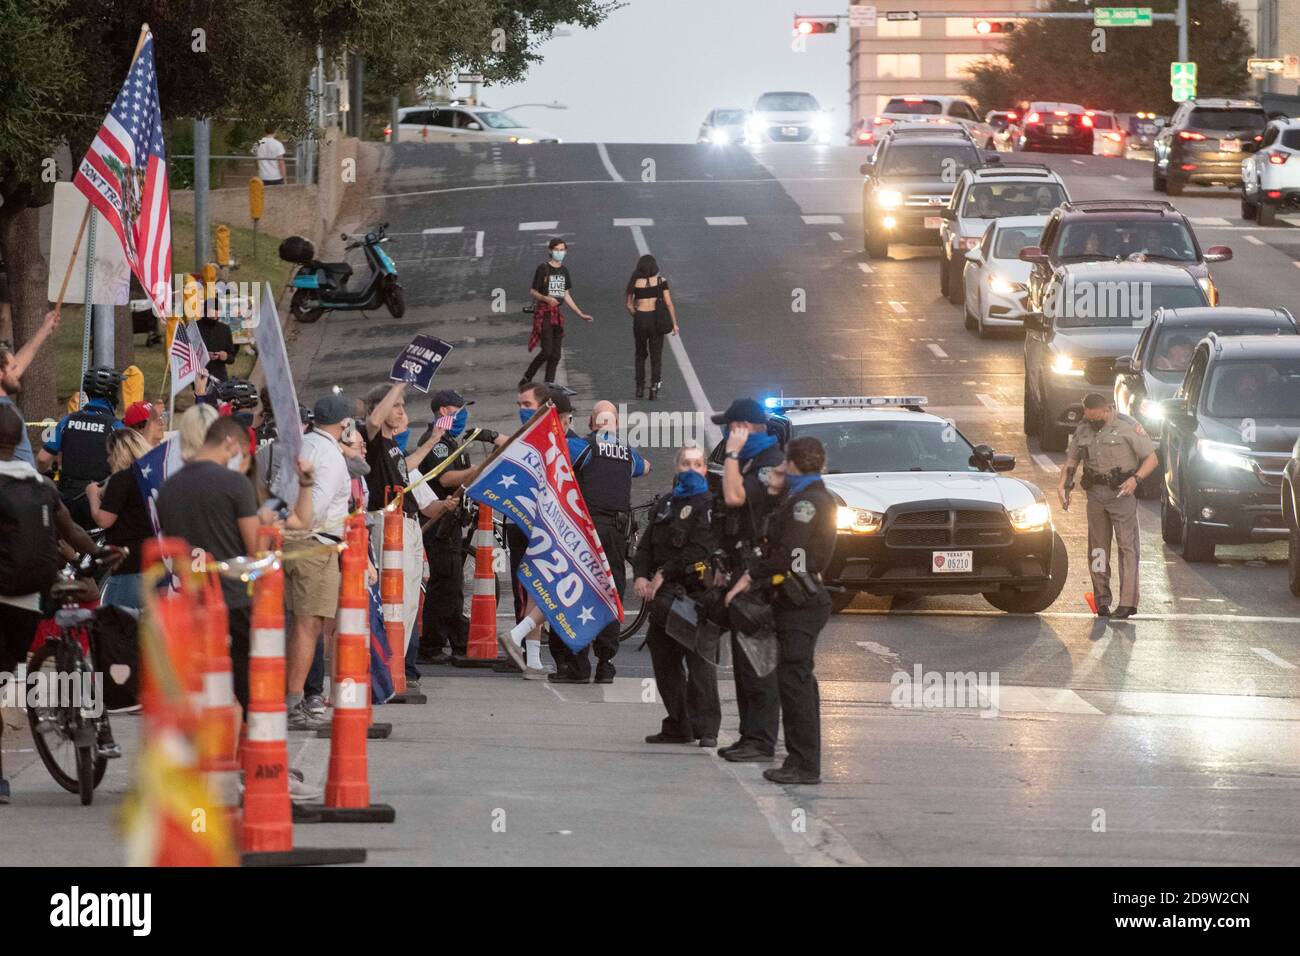 November 7, 2020, Austin, Texas, USA: Pro-Trump supporters rally at the Texas Capitol where Austin police and Texas troopers tried to keep Biden and Trump supporters apart.  The protest numbered a few hundred after Biden was declared the winner for President of the US on November 7, 2020. (Credit Image: © Bob Daemmrich/ZUMA Wire) Stock Photo